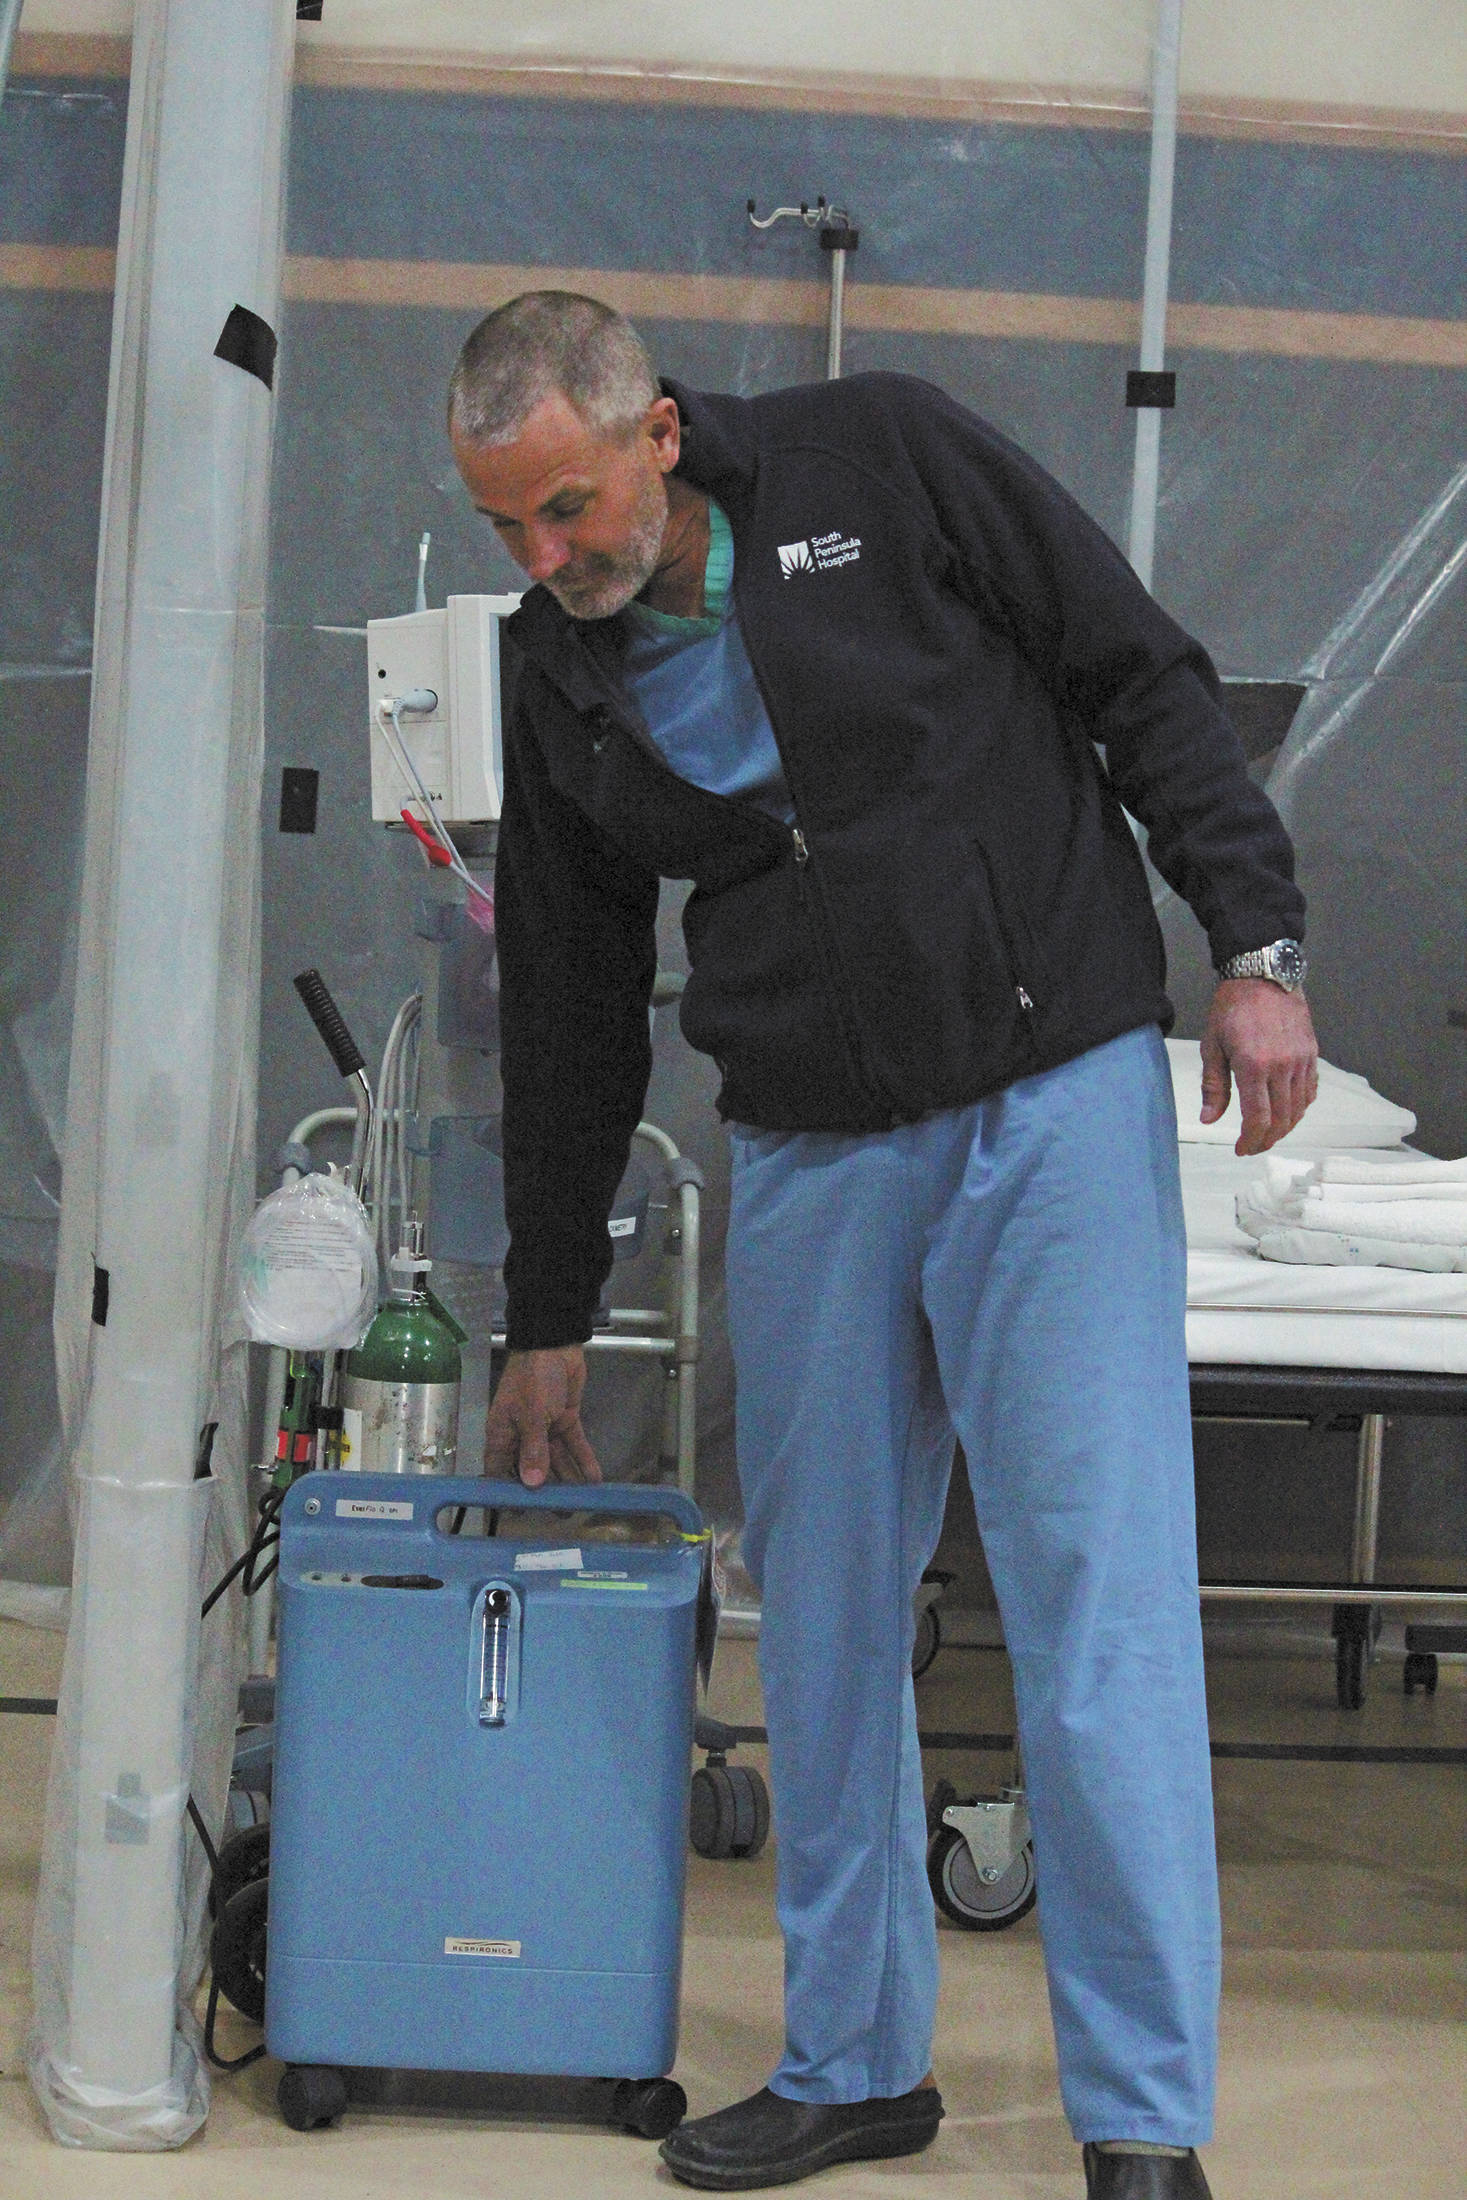 Dr. Todd Boling, medical director of the Alternate Care Site Leadership team, points out one of several needed oxygen concentrators in South Peninsula Hospital’s alternate care site for COVID-19 patients on Monday, April 6, 2020 at the site at Christian Community Church in Homer, Alaska. The oxygen concentrators will be needed on site for COVID-19 patients having trouble breathing. (Photo by Megan Pacer/Homer News)